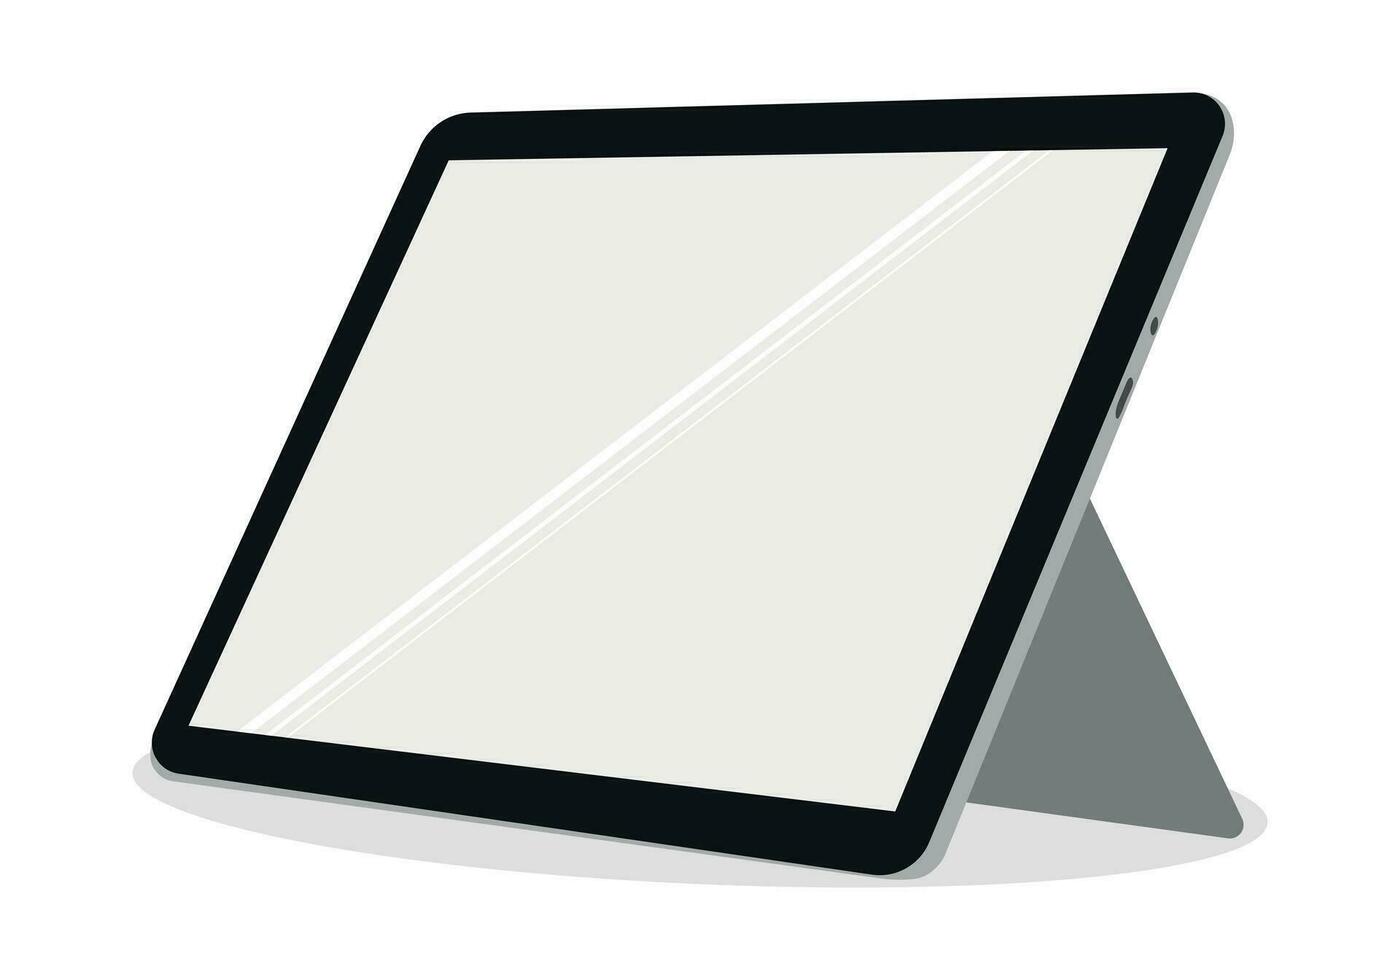 tablet pc with screen. tablet flat vector illustration. tablet with background